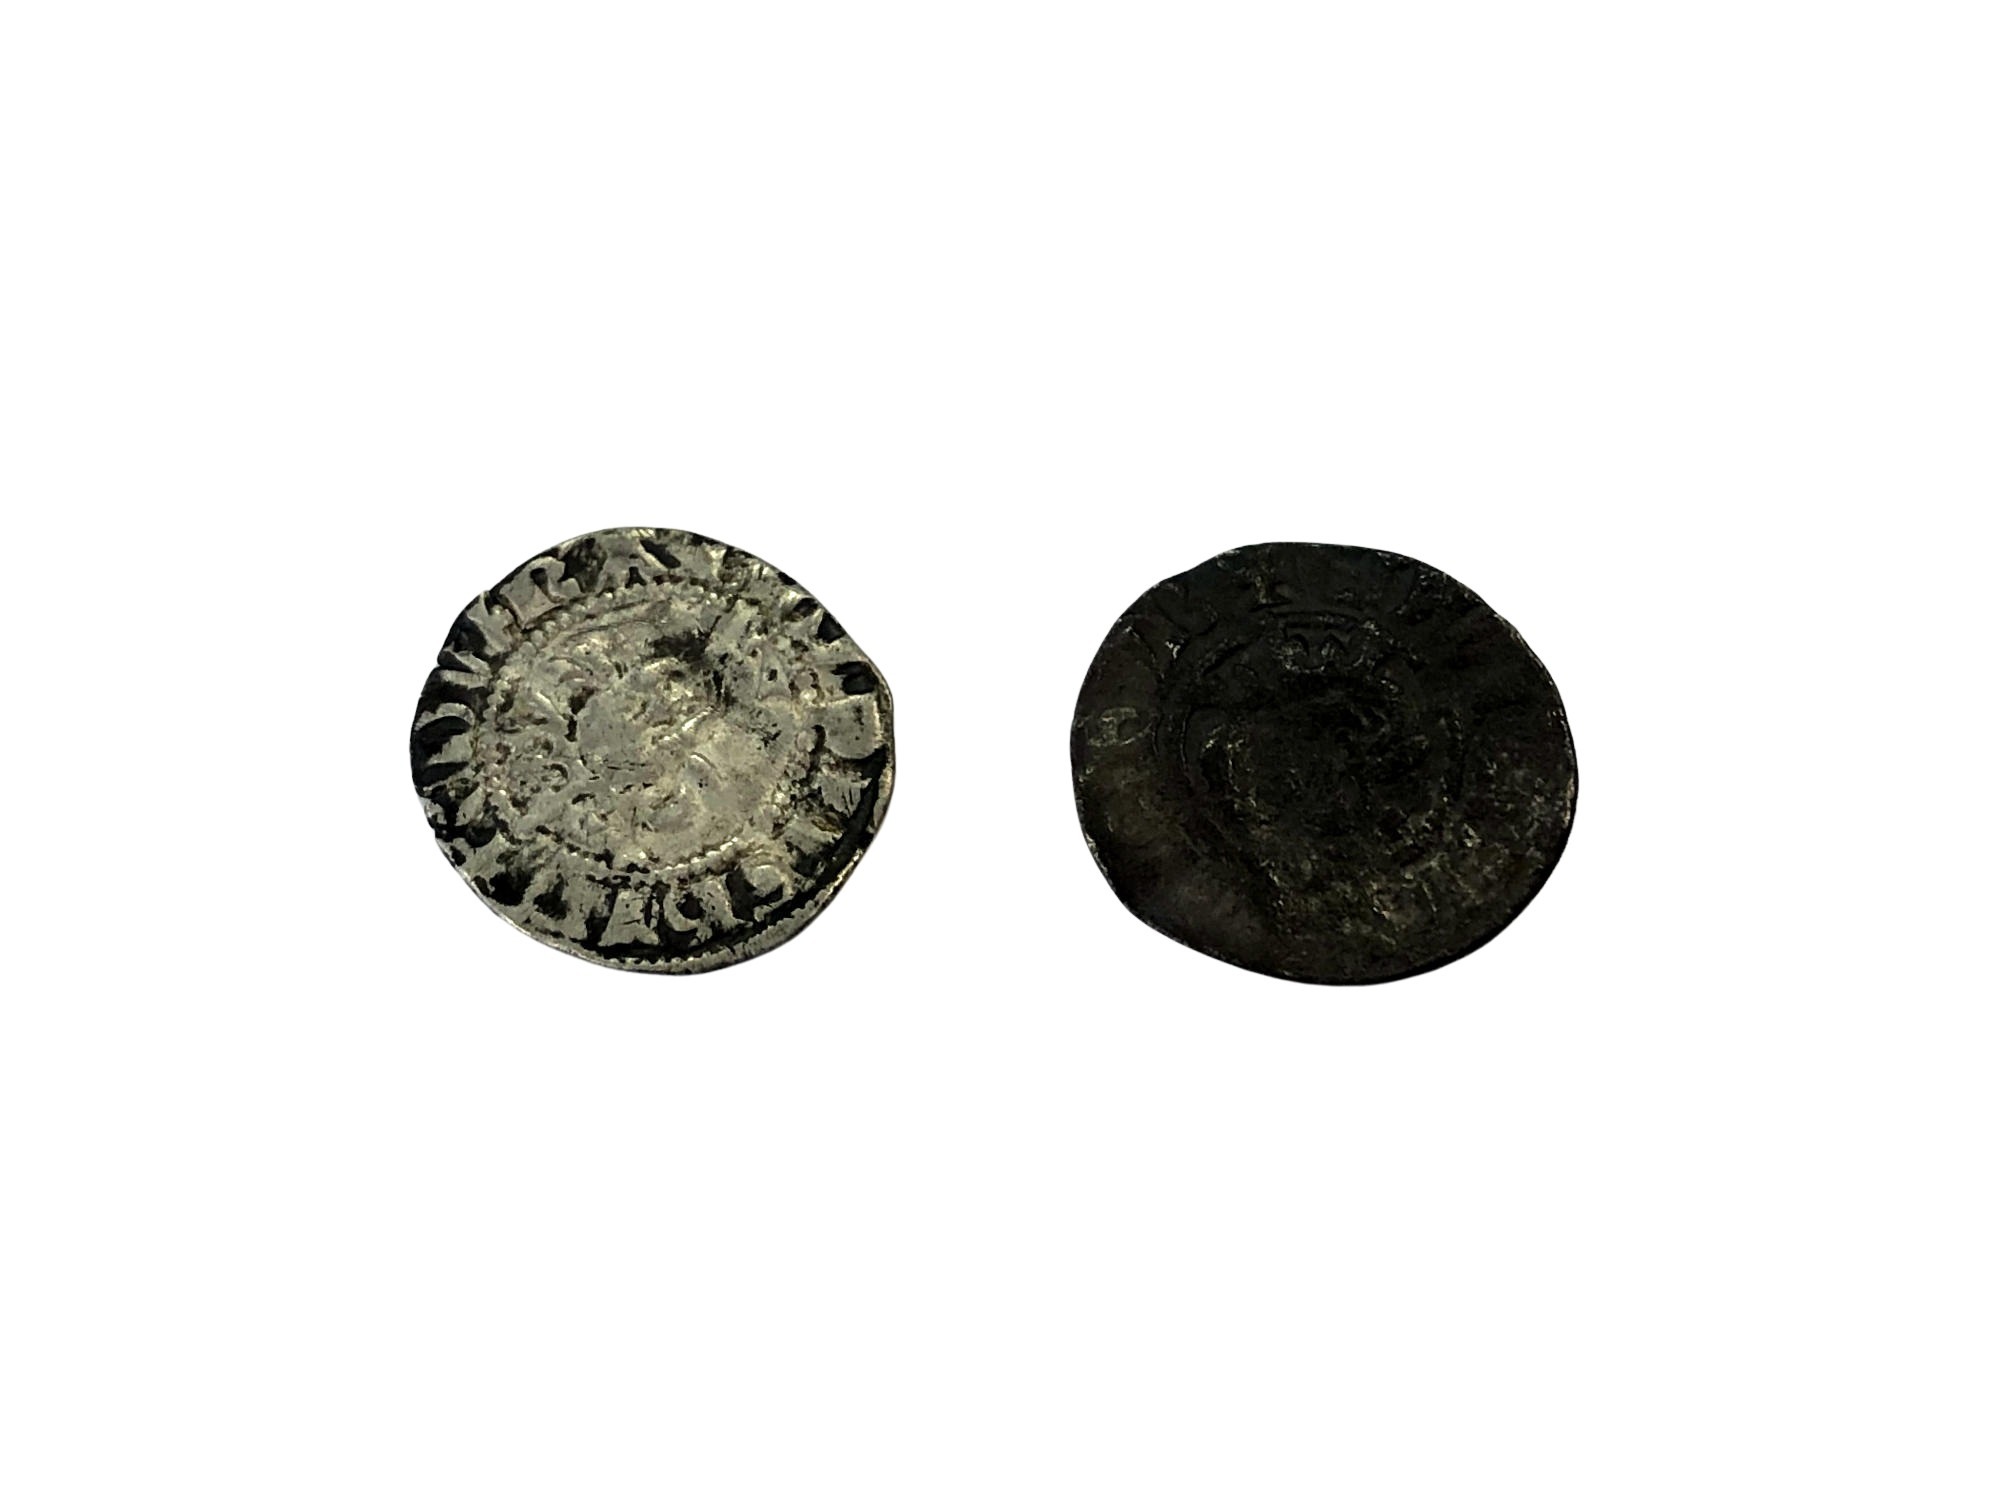 Two hammered silver pennies